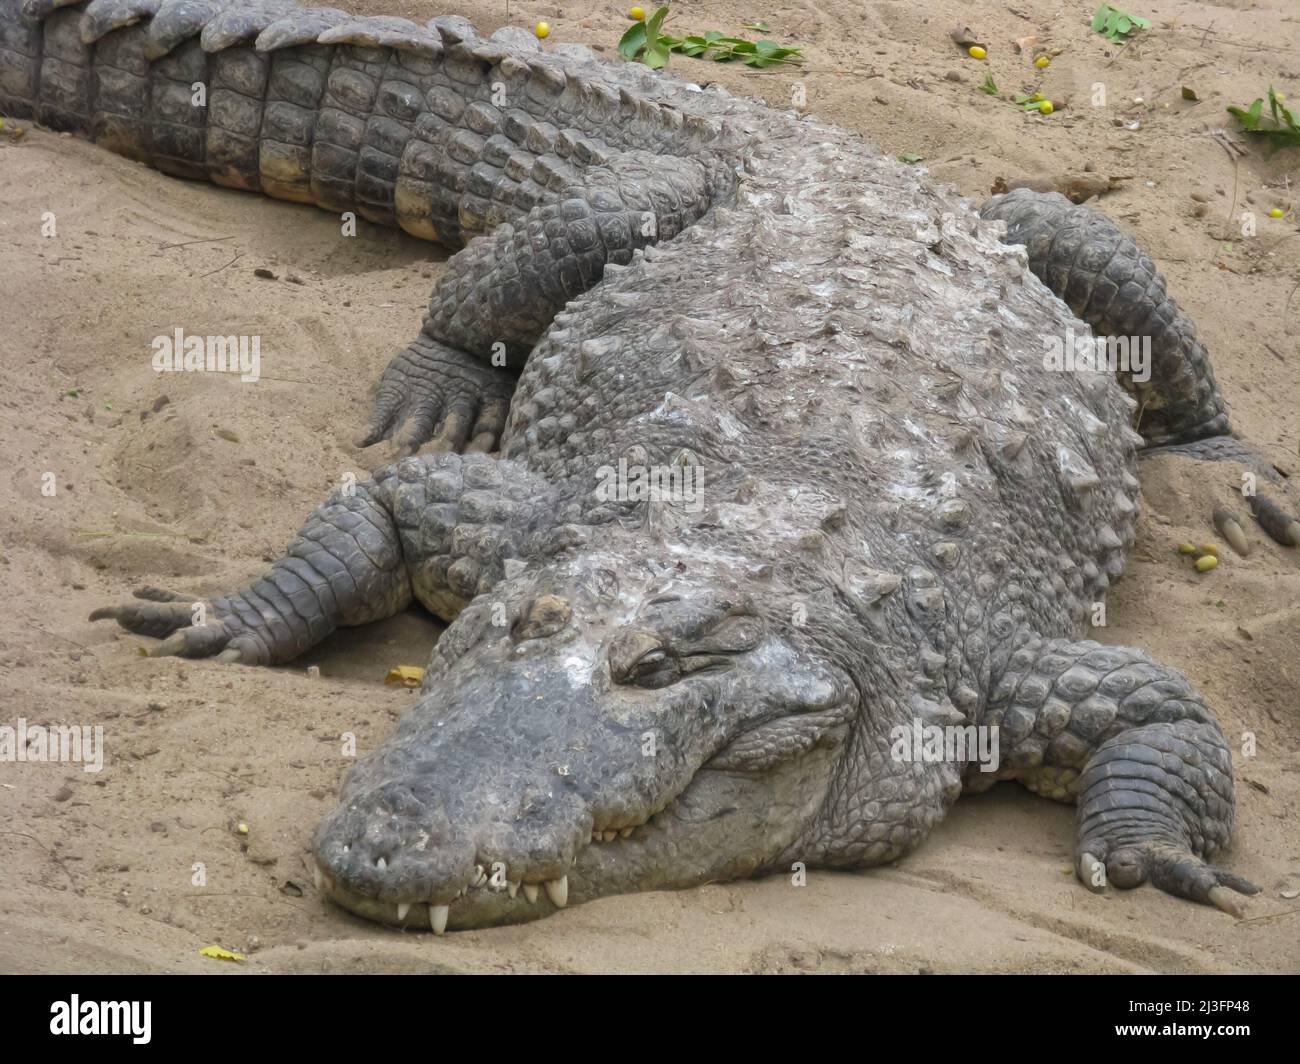 Selective focus close up portrait of a crocodile resting on sand with its his tooth and claws visible Stock Photo